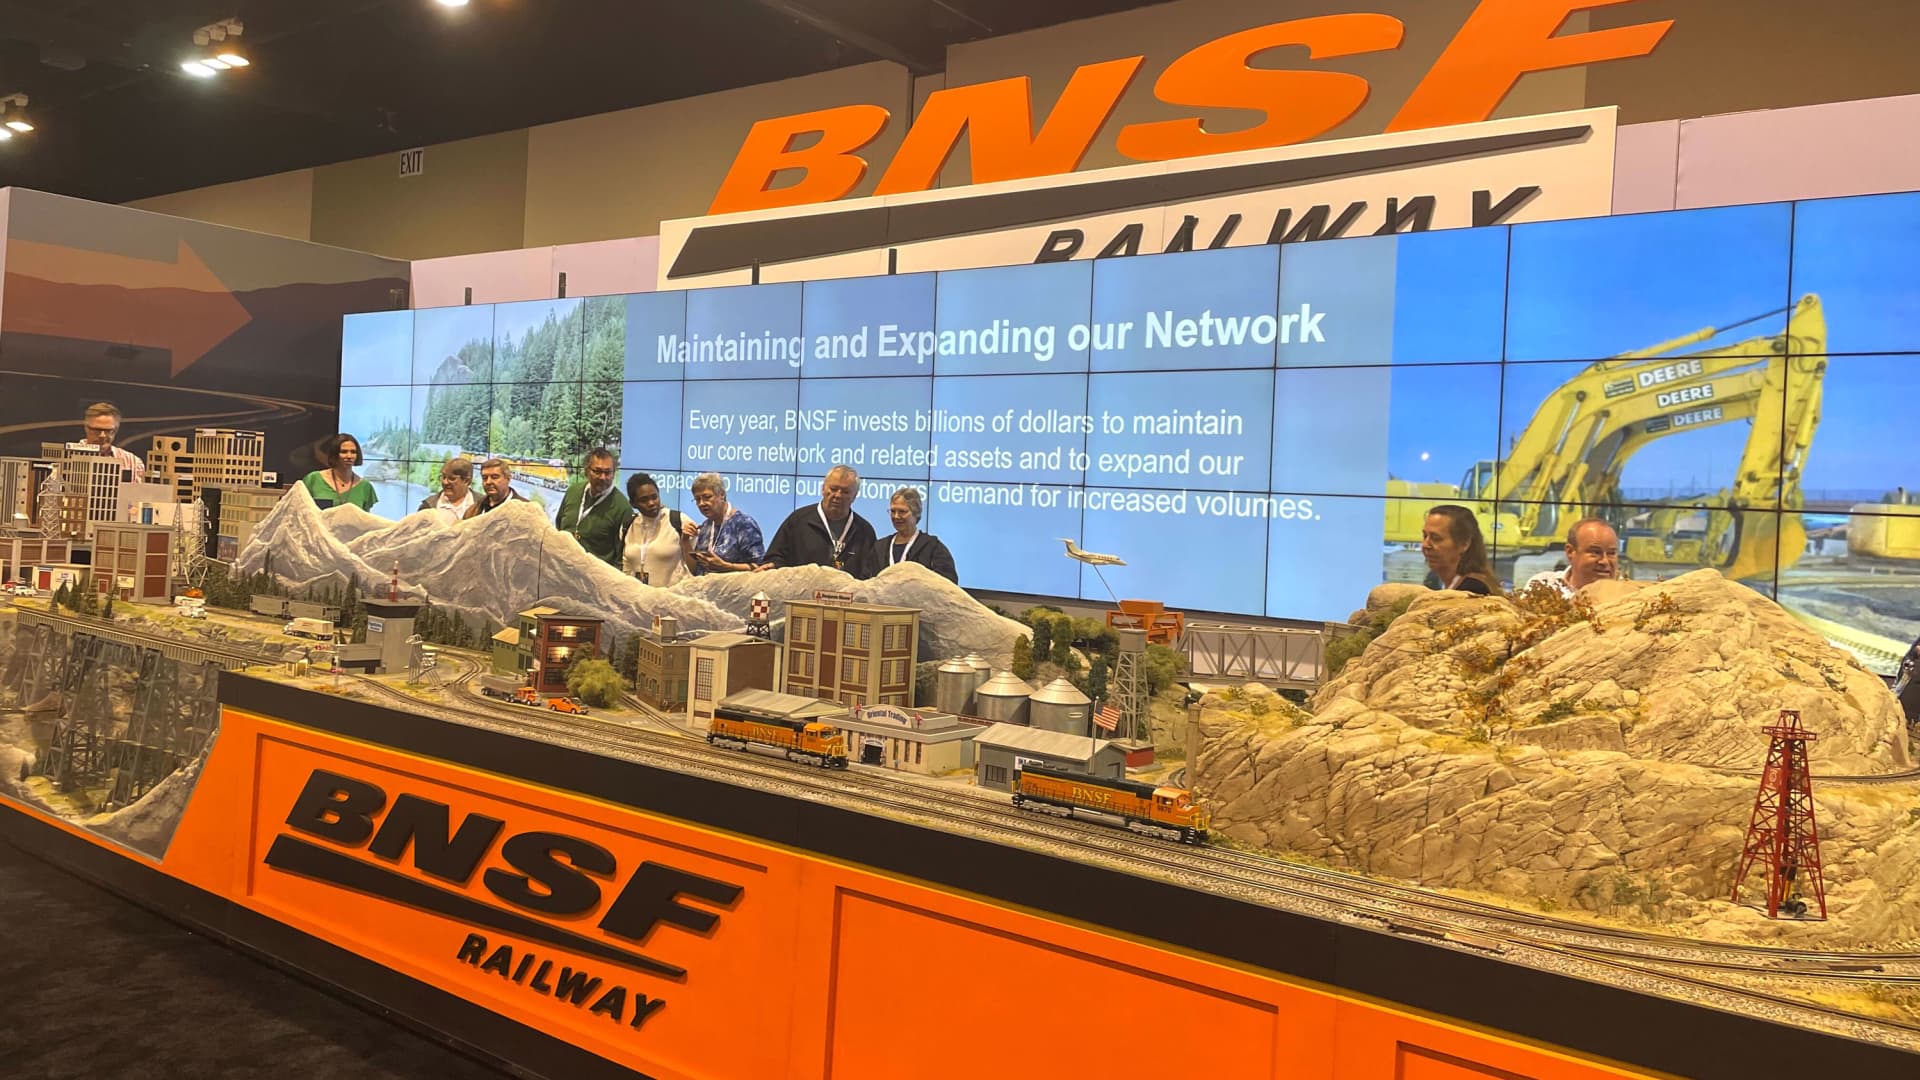 A display for the BNSF Railway at the Berkshire Hathaway Annual Shareholder Meeting in Omaha, Nebraska.